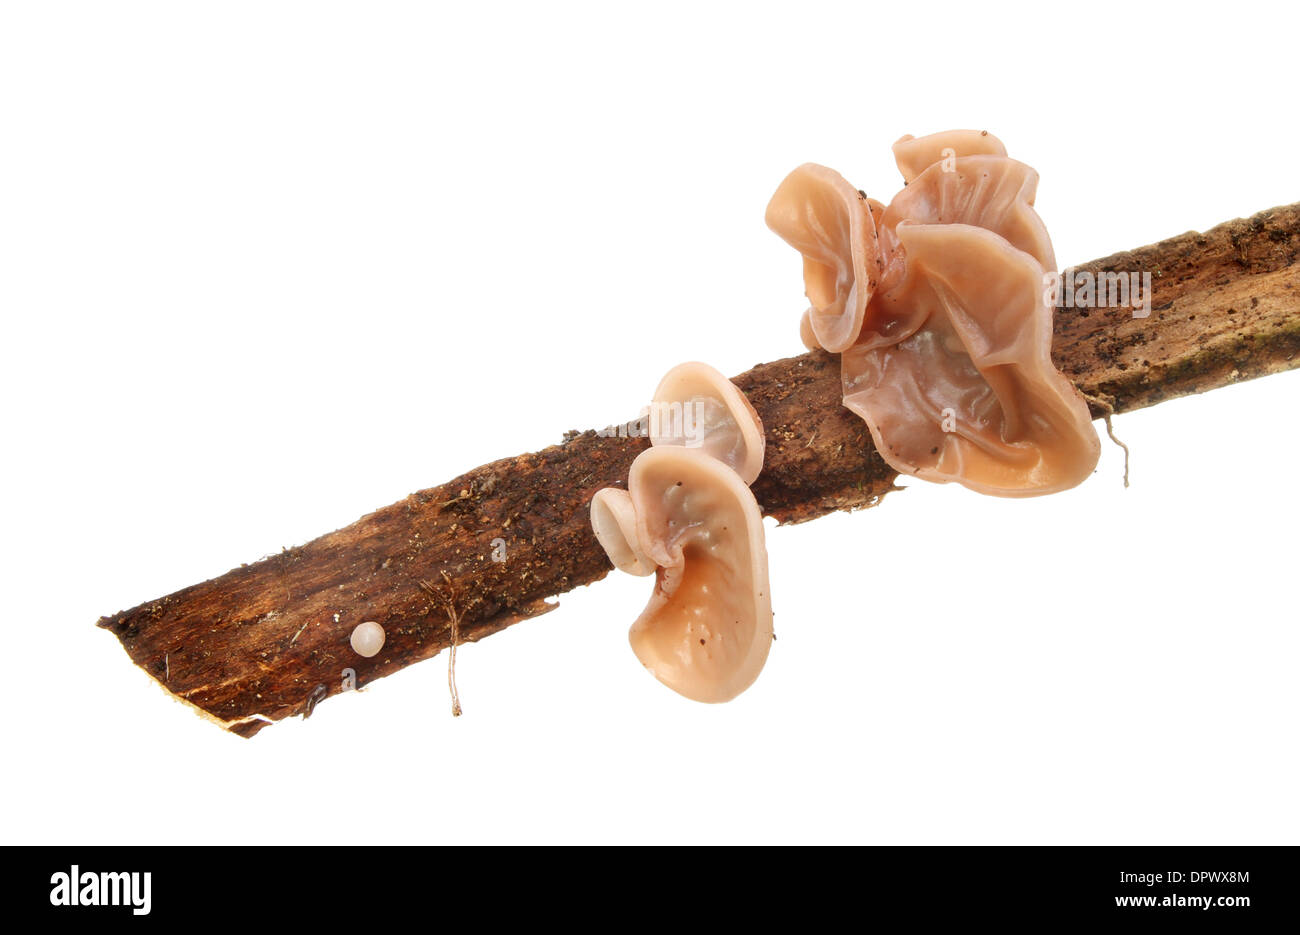 Ear like bracket fungi growing out of a rotting branch isolated against white Stock Photo